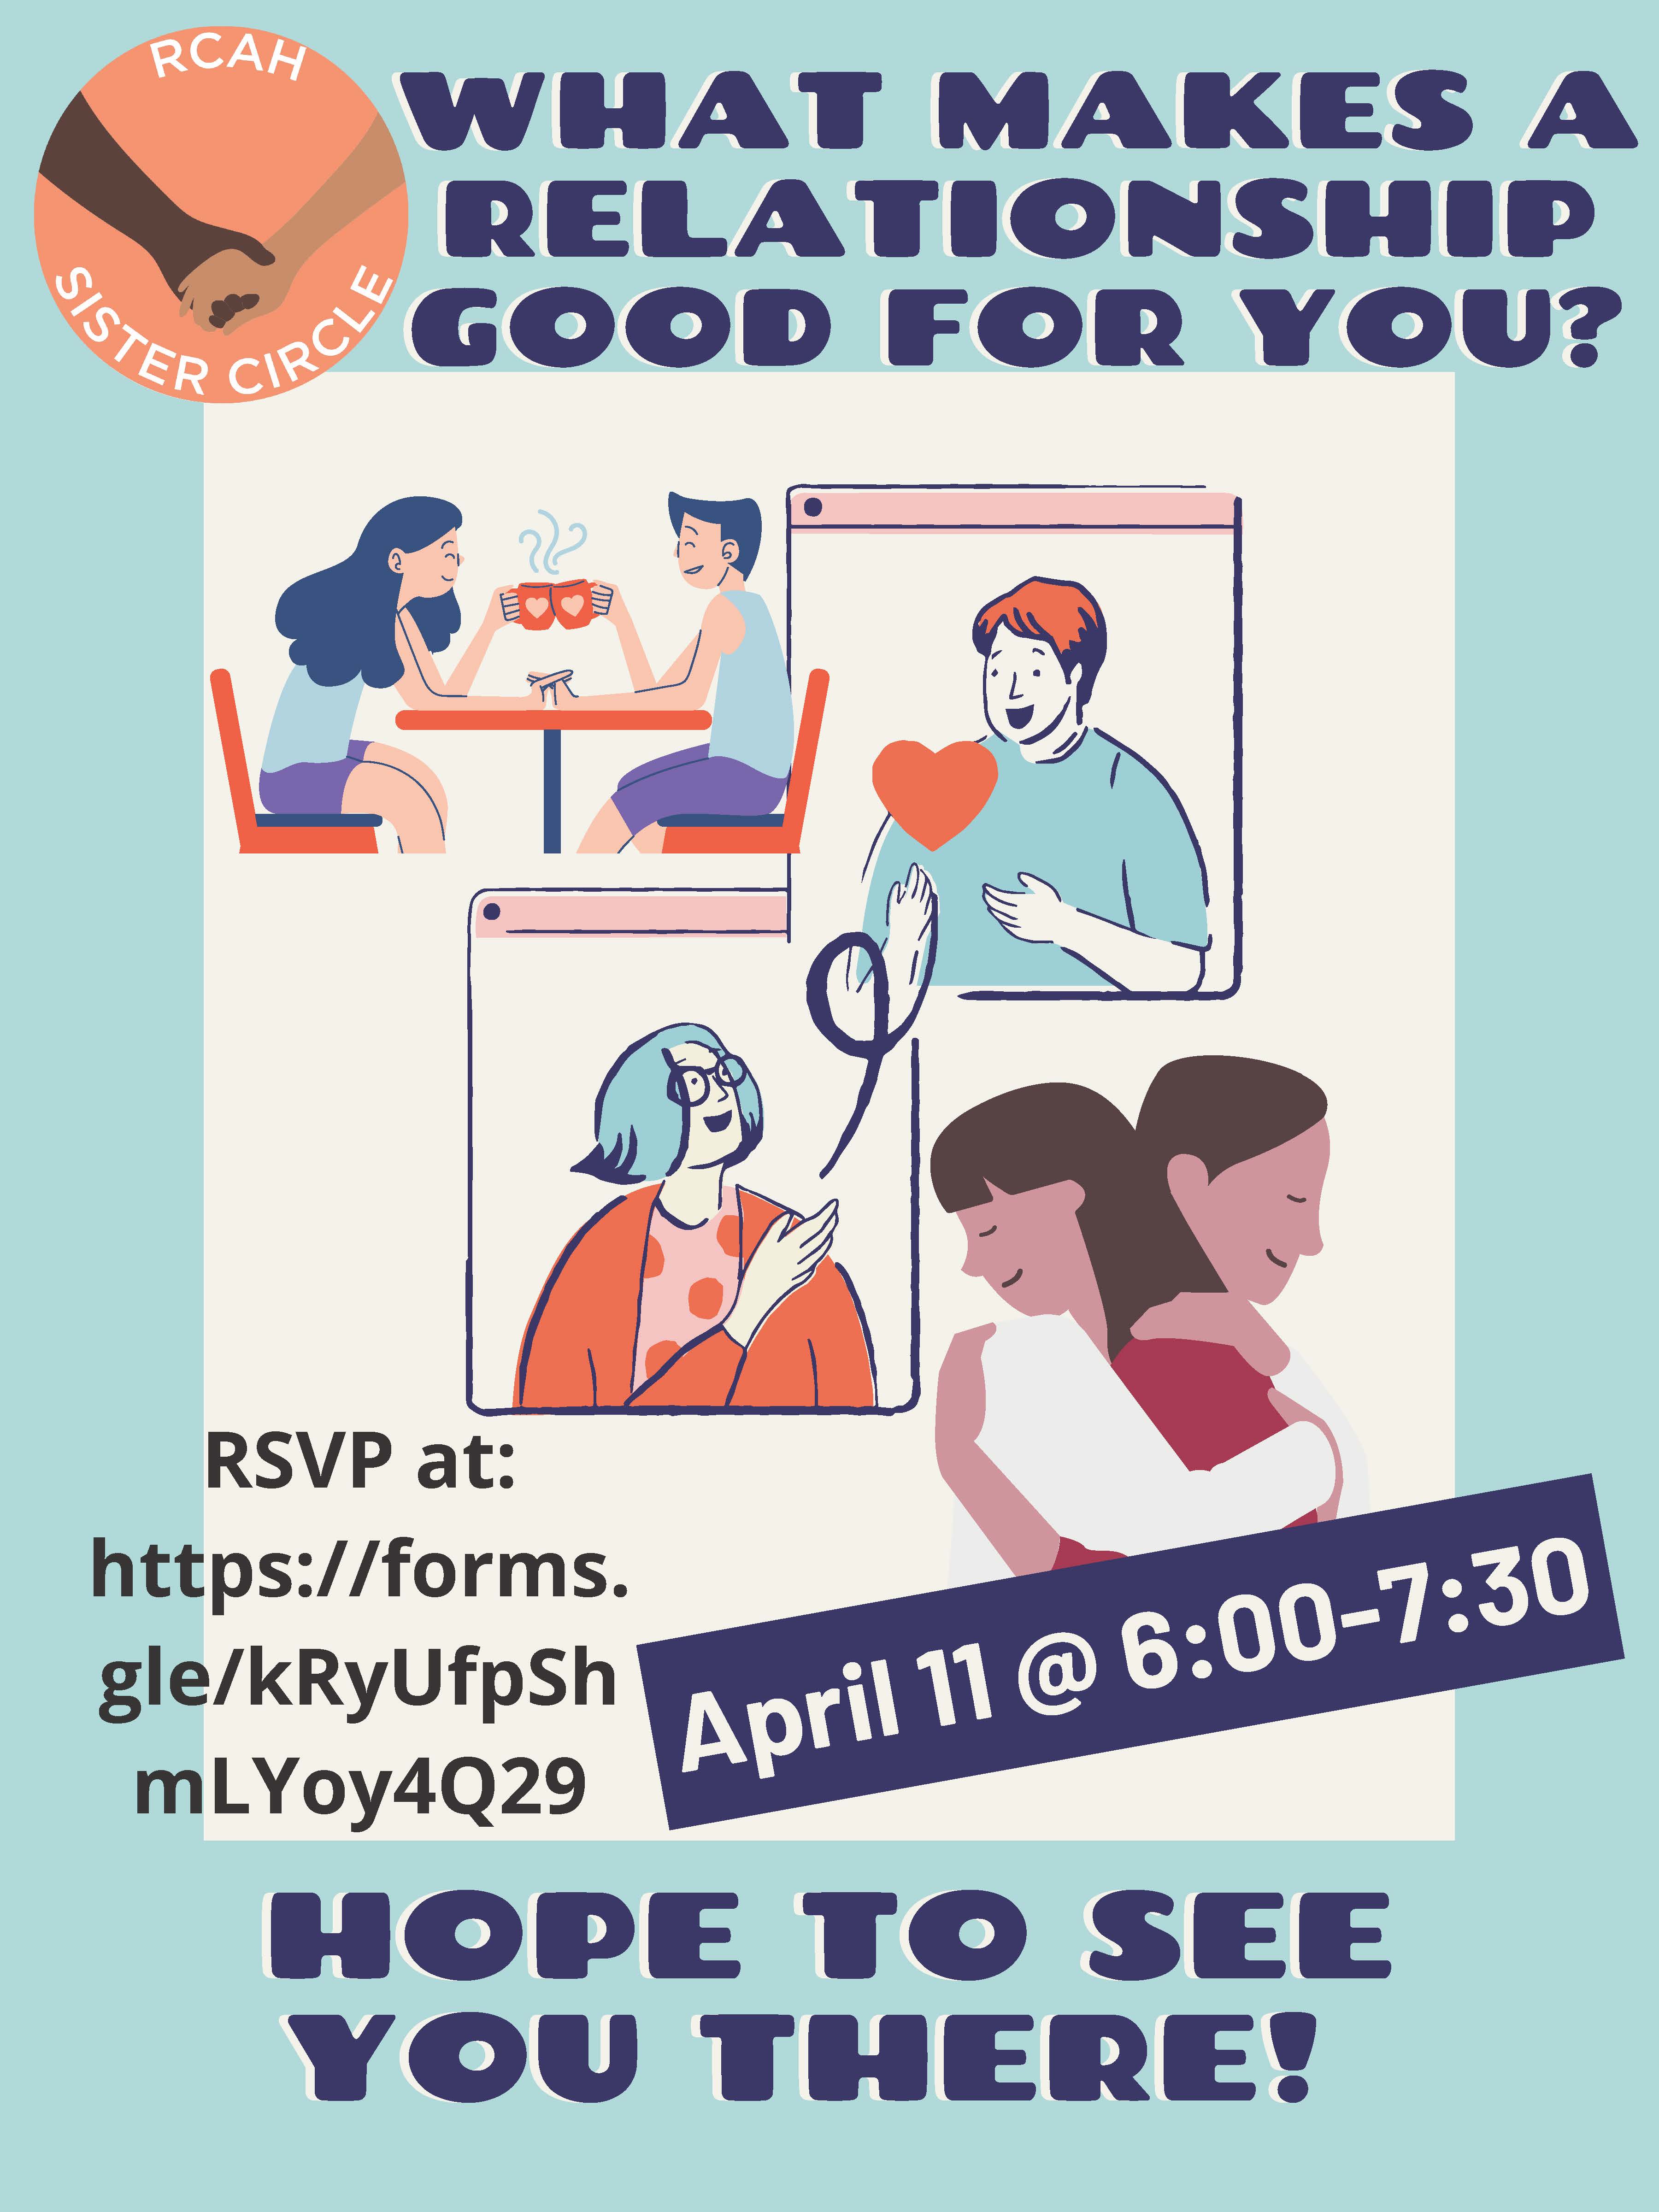 Image is a flyer for the sister circle event showing flat-graphic illustrations of people hugging, sharing a conversation over a meal, and hugging.